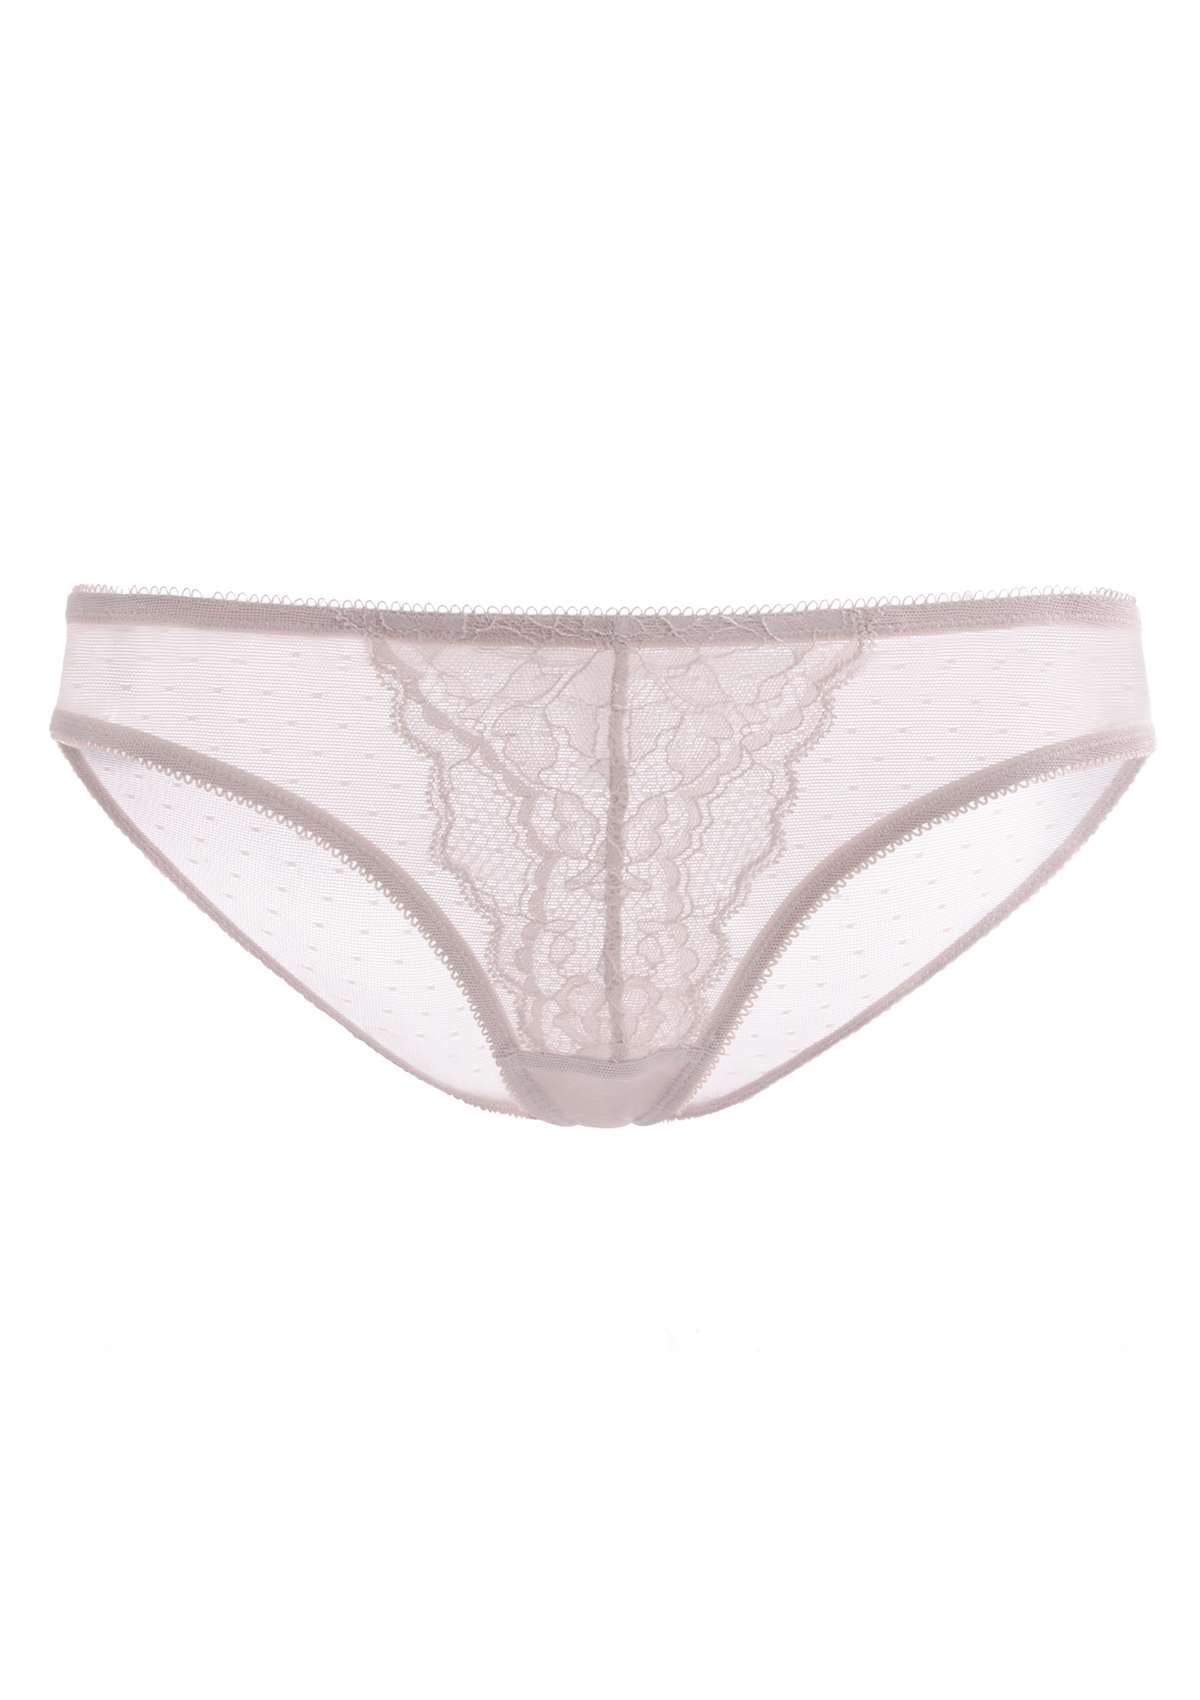 HSIA Mid-Rise Sheer Stylish Lace-Trimmed Supportive Comfy Mesh Pantie - M / Dark Pink / Bikini